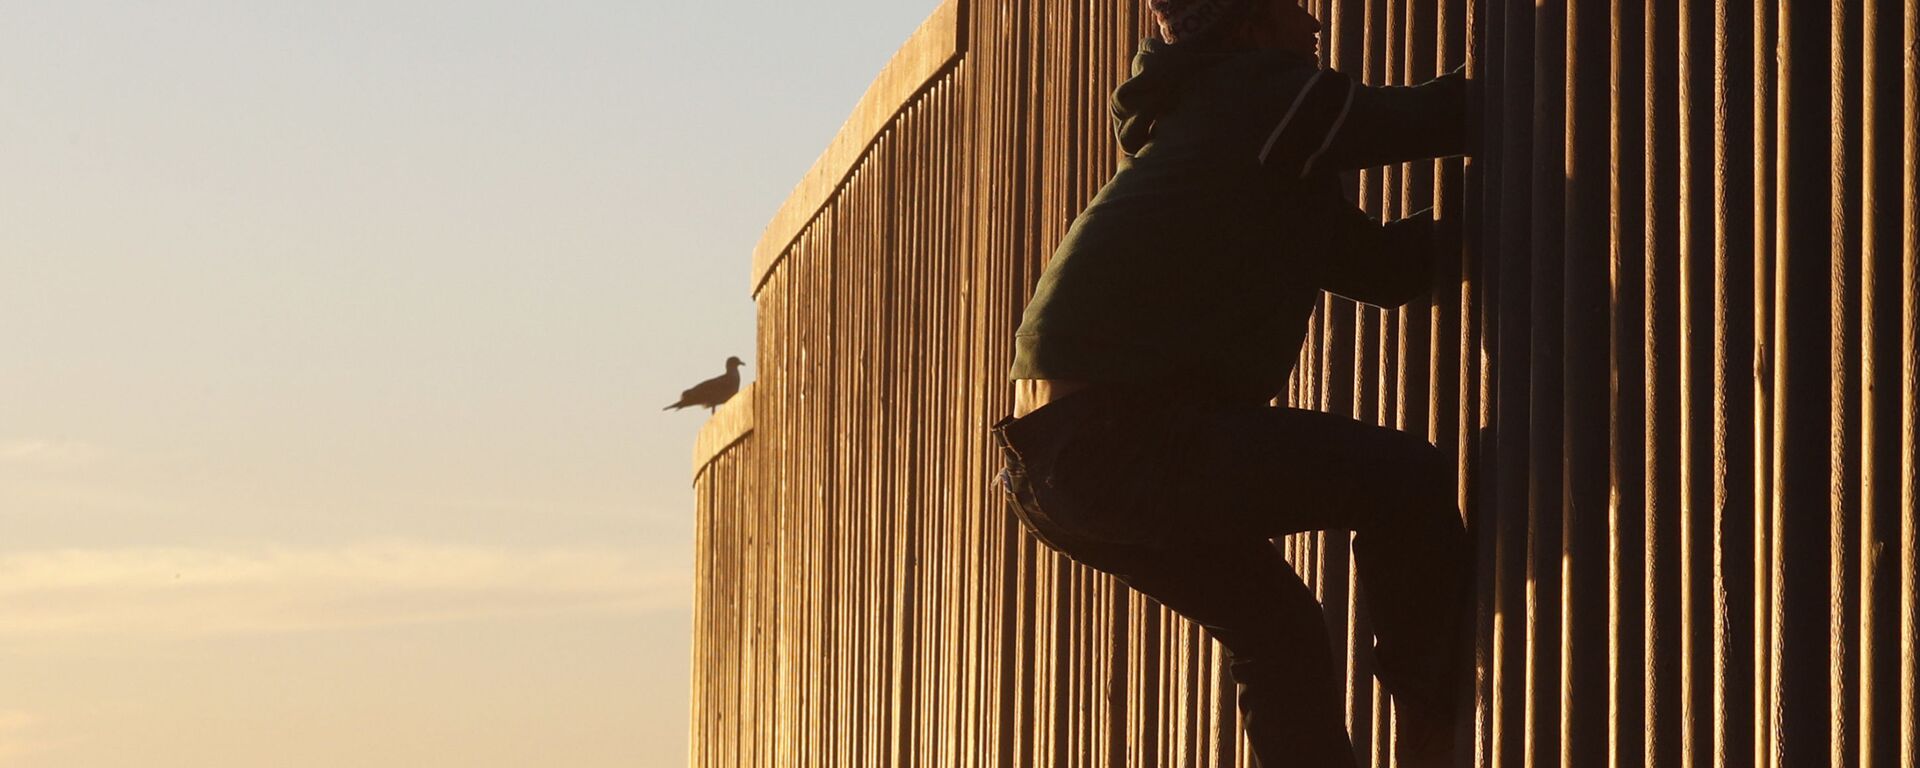 Honduran migrant Jonatan Matamoros Flores, 33, who arrived in October with a migrant caravan, climbs the U.S. border wall to stand atop it before returning to the Mexican side in Tijuana, Mexico, Saturday, Dec. 8, 2018 - Sputnik International, 1920, 16.03.2021